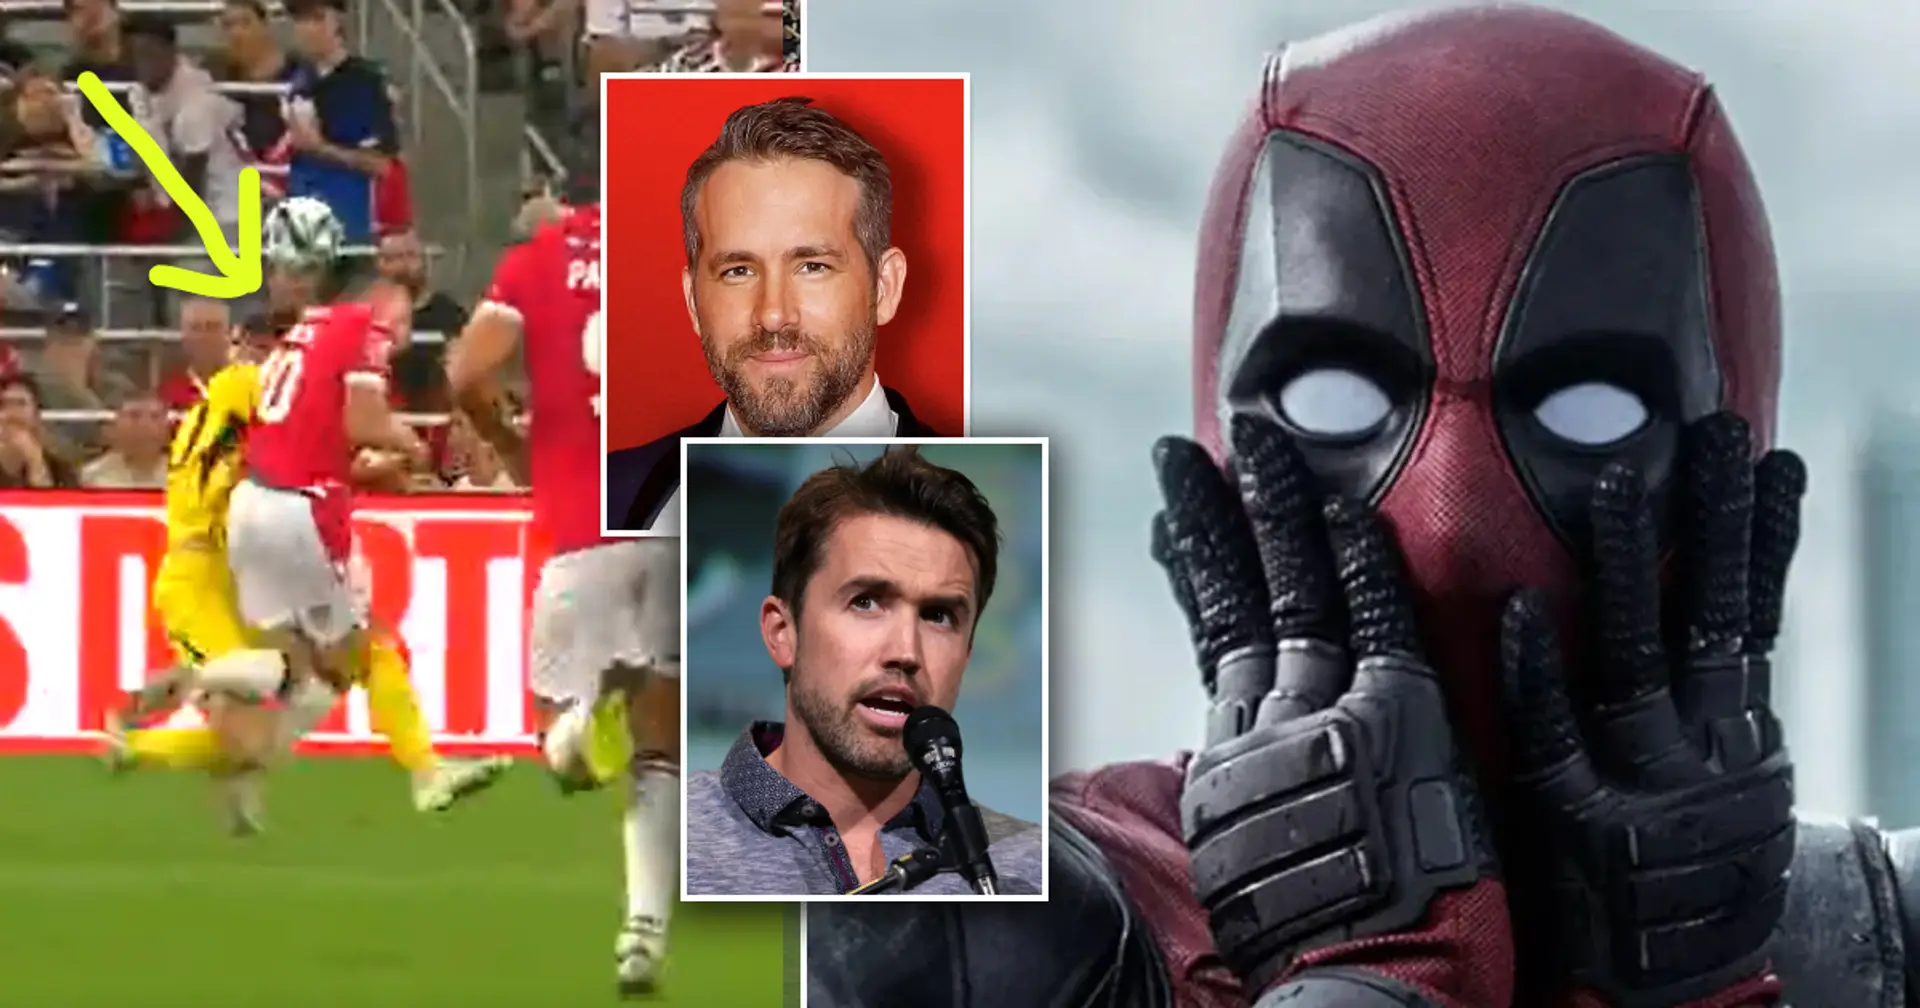 Ryan Reynolds reacts as Man United goalie sends his star player to hospital with punctured lung